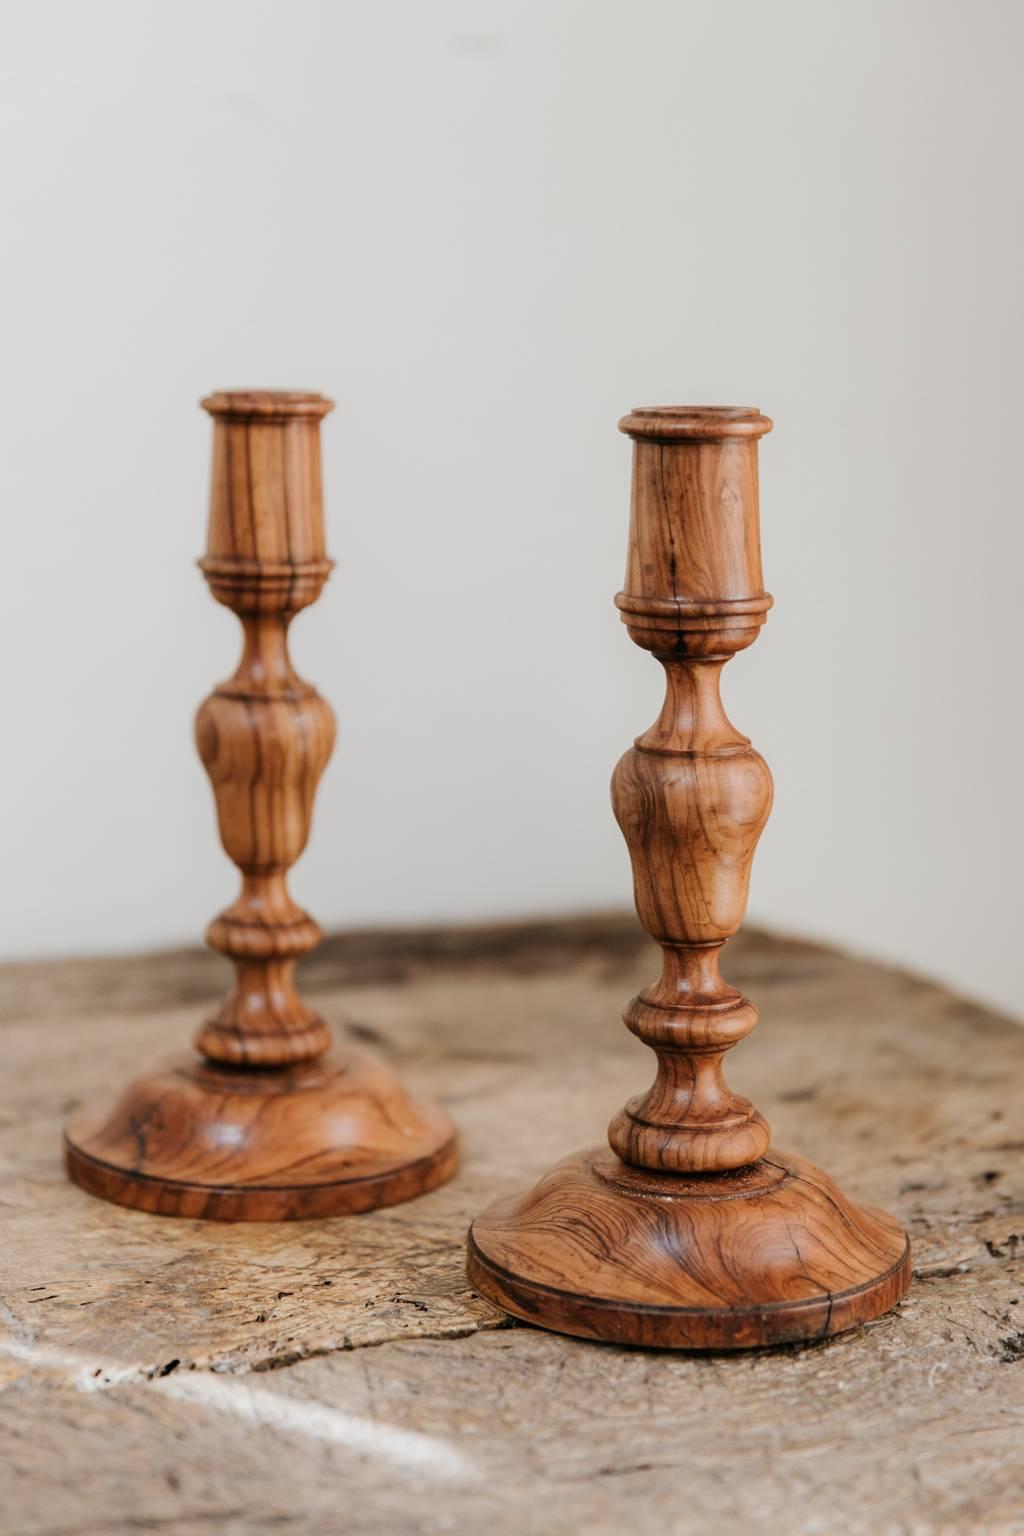 This elegant and smart pair of candlesticks were made in the 19th century in France, latheturned in olivewood, filled with lead to make them stand stabile on every table.